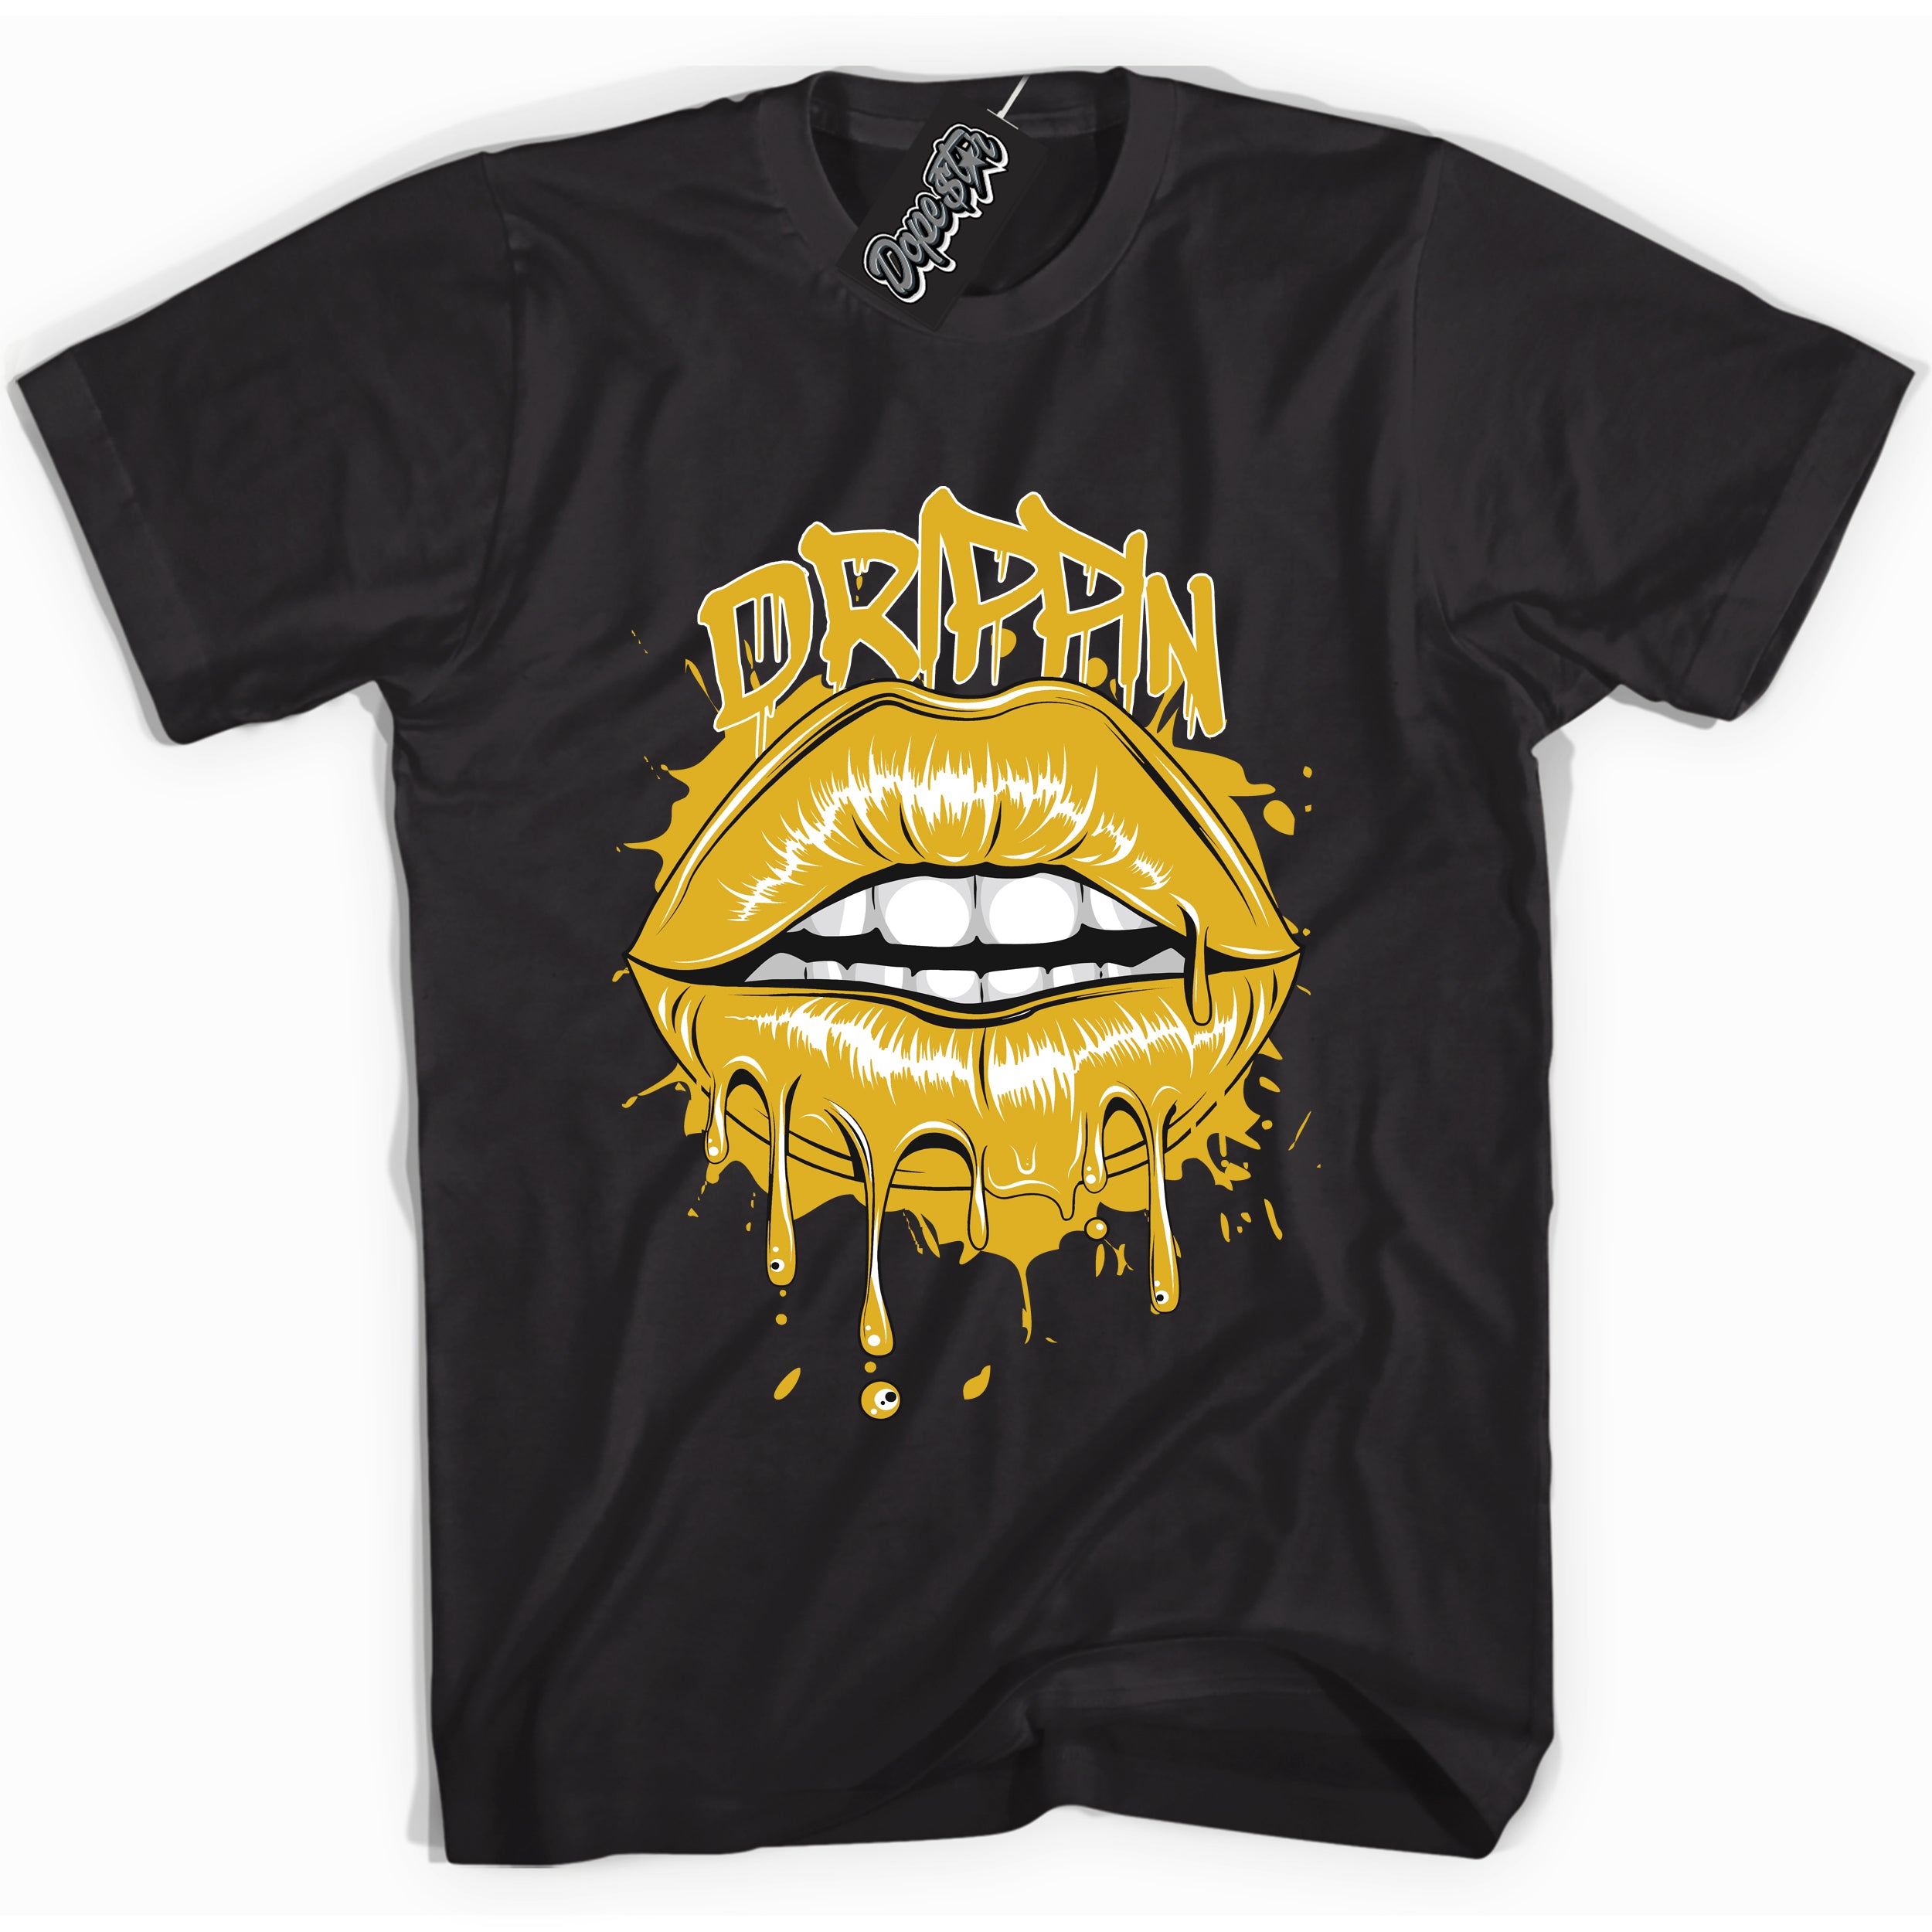 Cool Black Shirt with “ Drippin” design that perfectly matches Yellow Ochre 6s Sneakers.